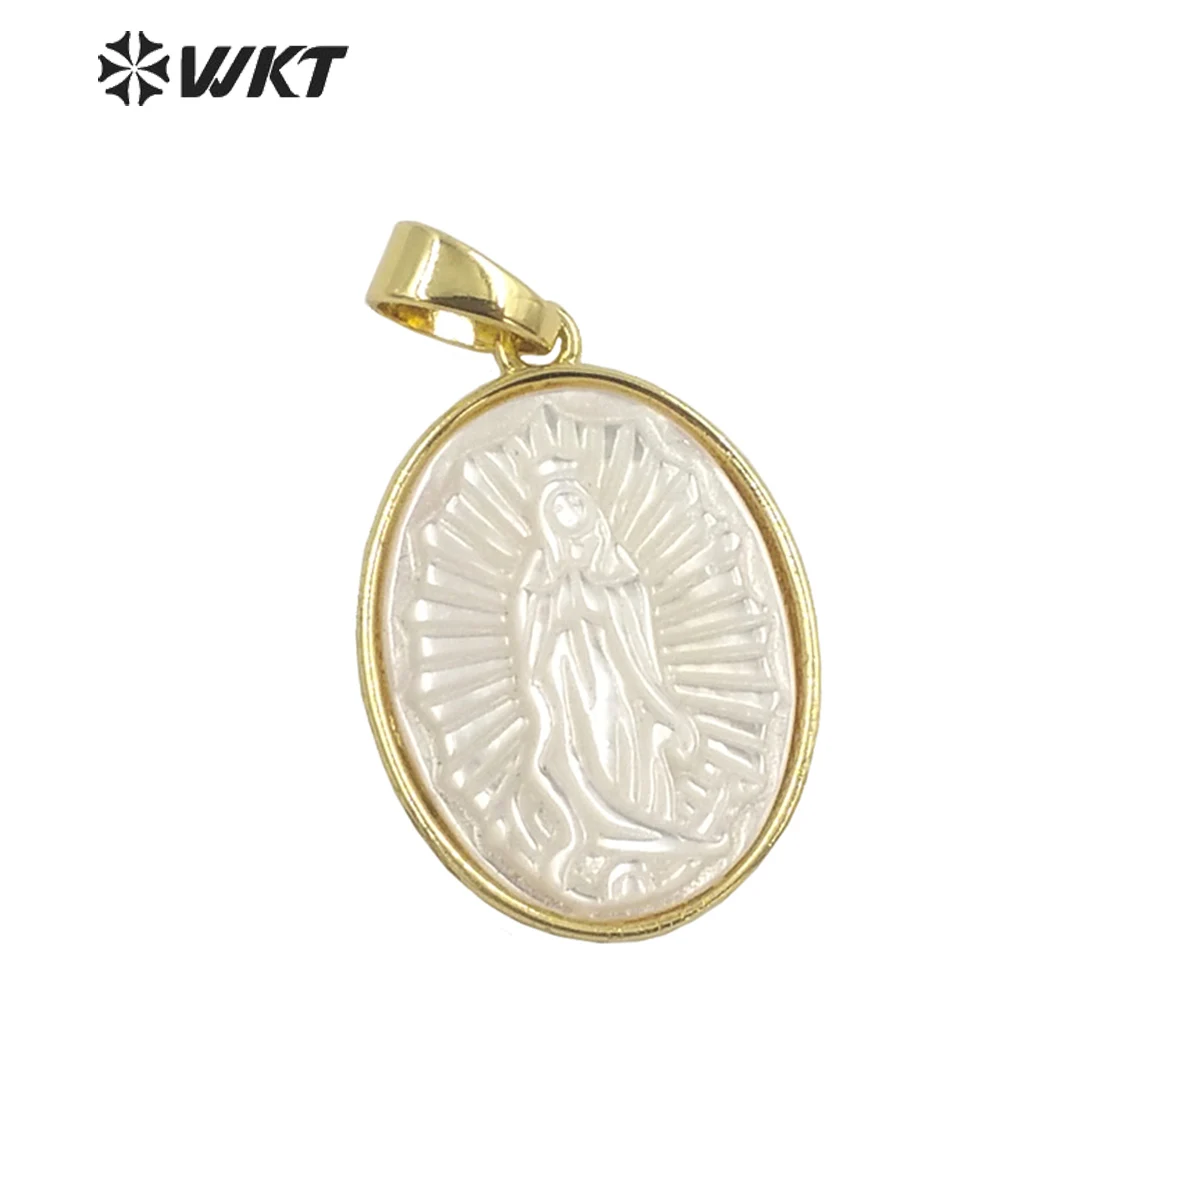 

WT-JP320 Wholesale Fashion Religious Christian Virgin Mary Shell Pendant Gold Bezel Oval Shape MOP Jewelry Finding